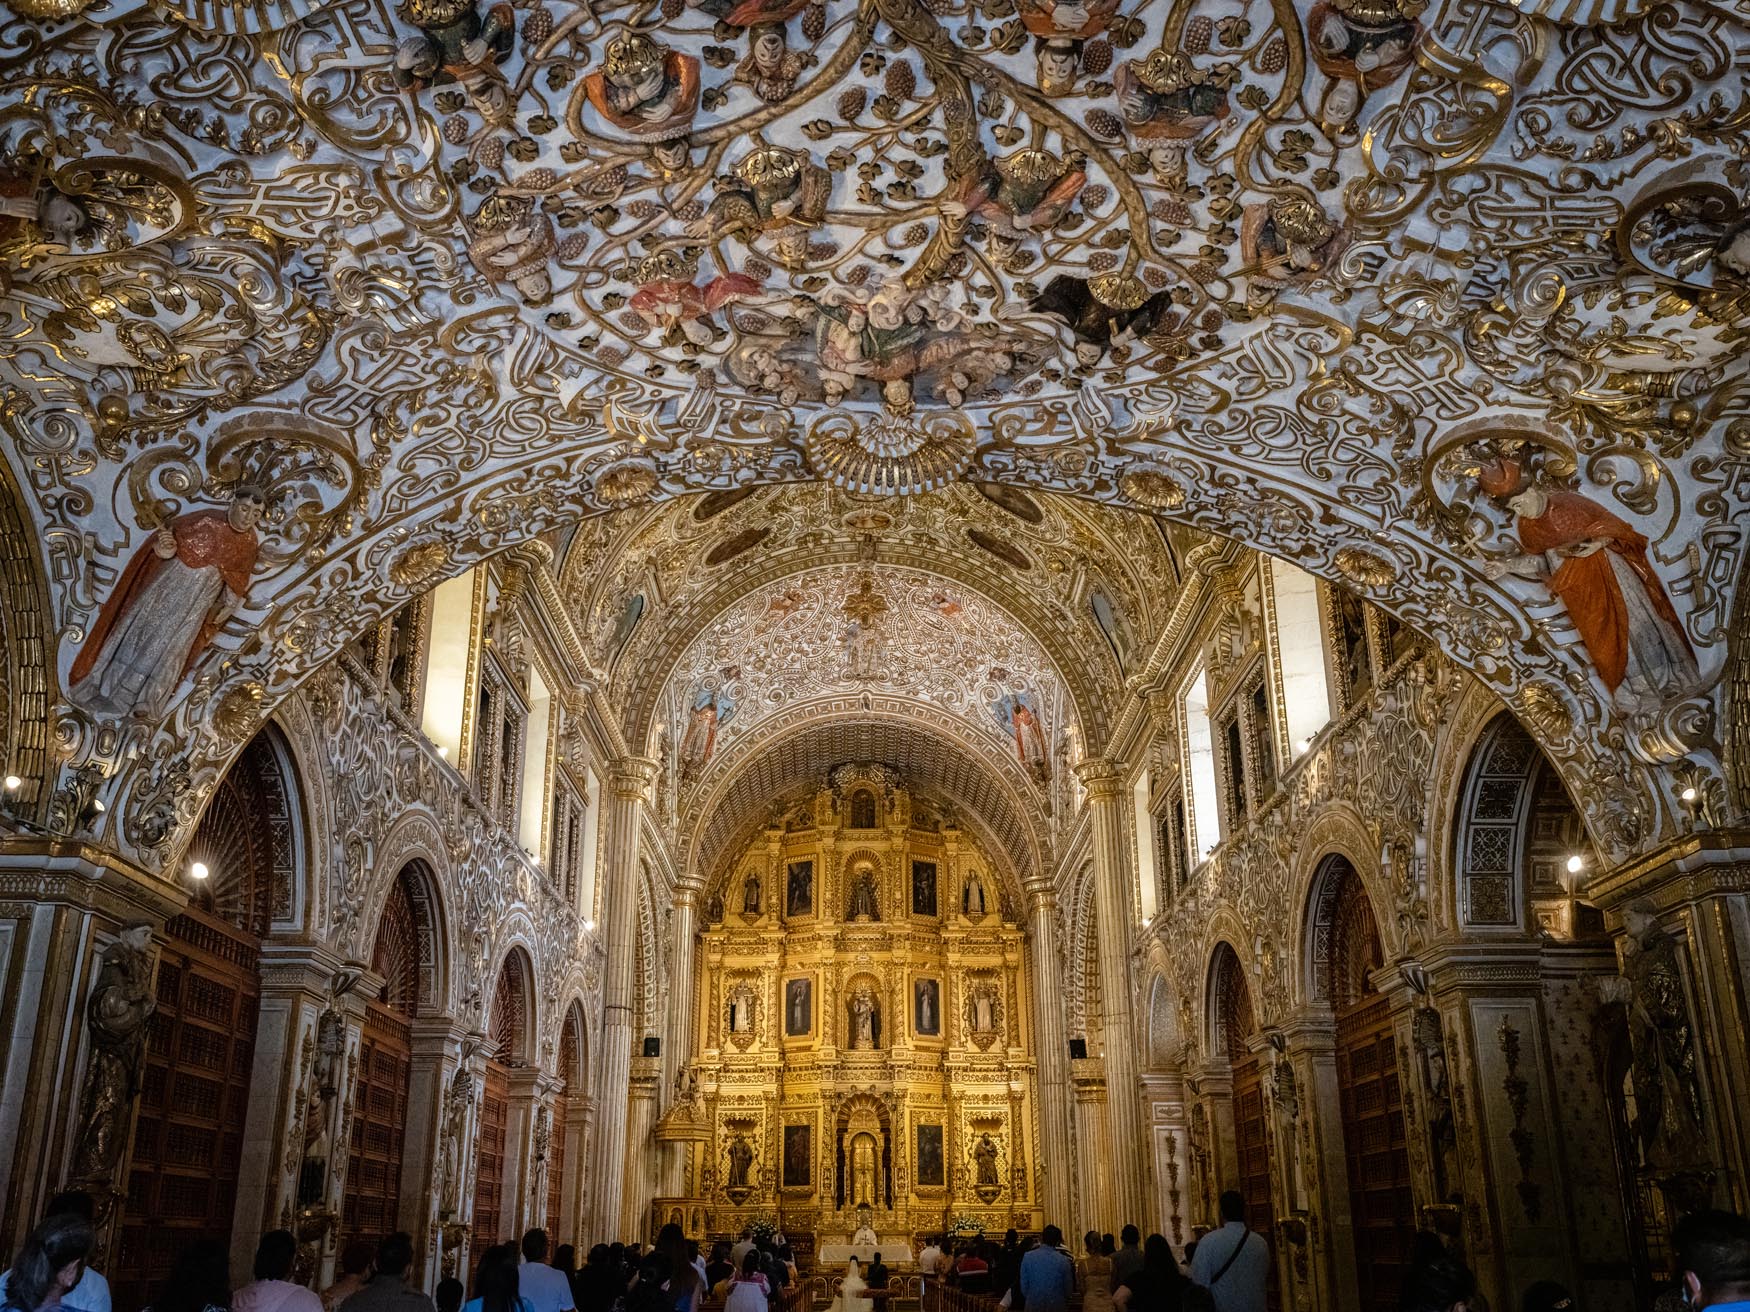 A stunning Mexican cathedral